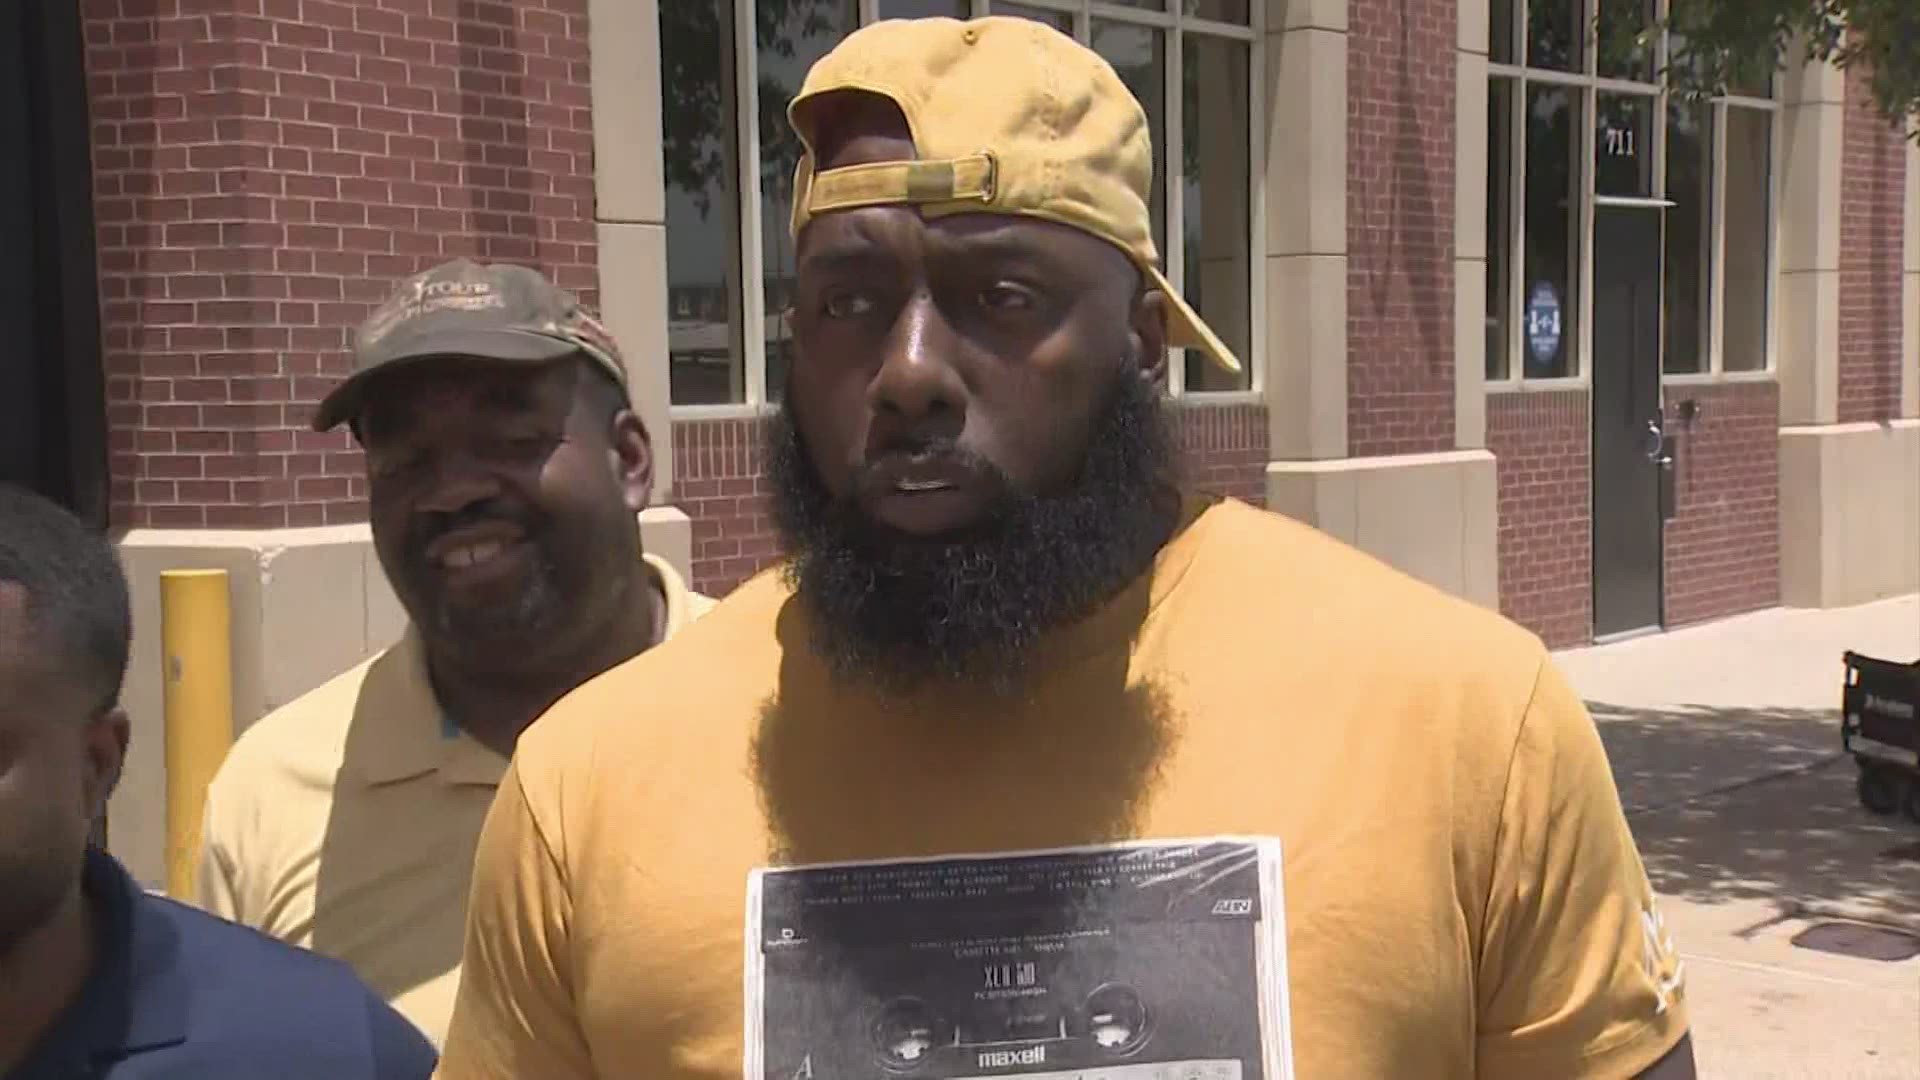 Before opening his own ice cream shop in Katy, Trae the Truth gave back to the community by donating some of his own homemade ice cream to inmates in Harris County.